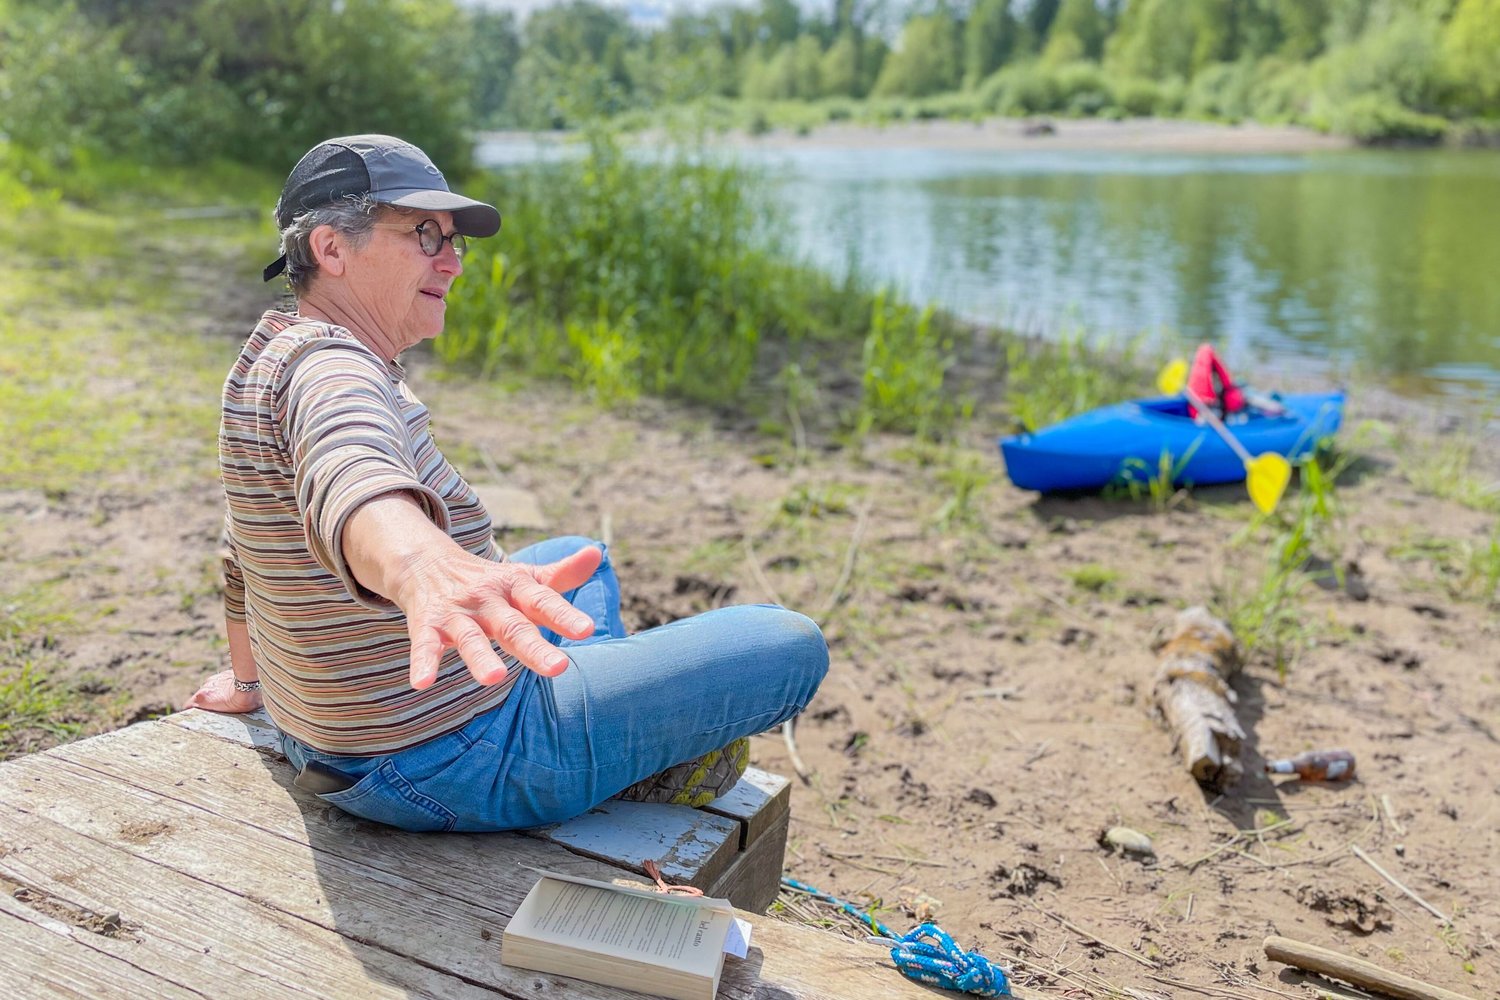 A paperback of Bel Canto sits on a dock next to Betsie De Wreede, a retired farmer in the Independence Valley, as she talks about flooding along the Chehalis River.